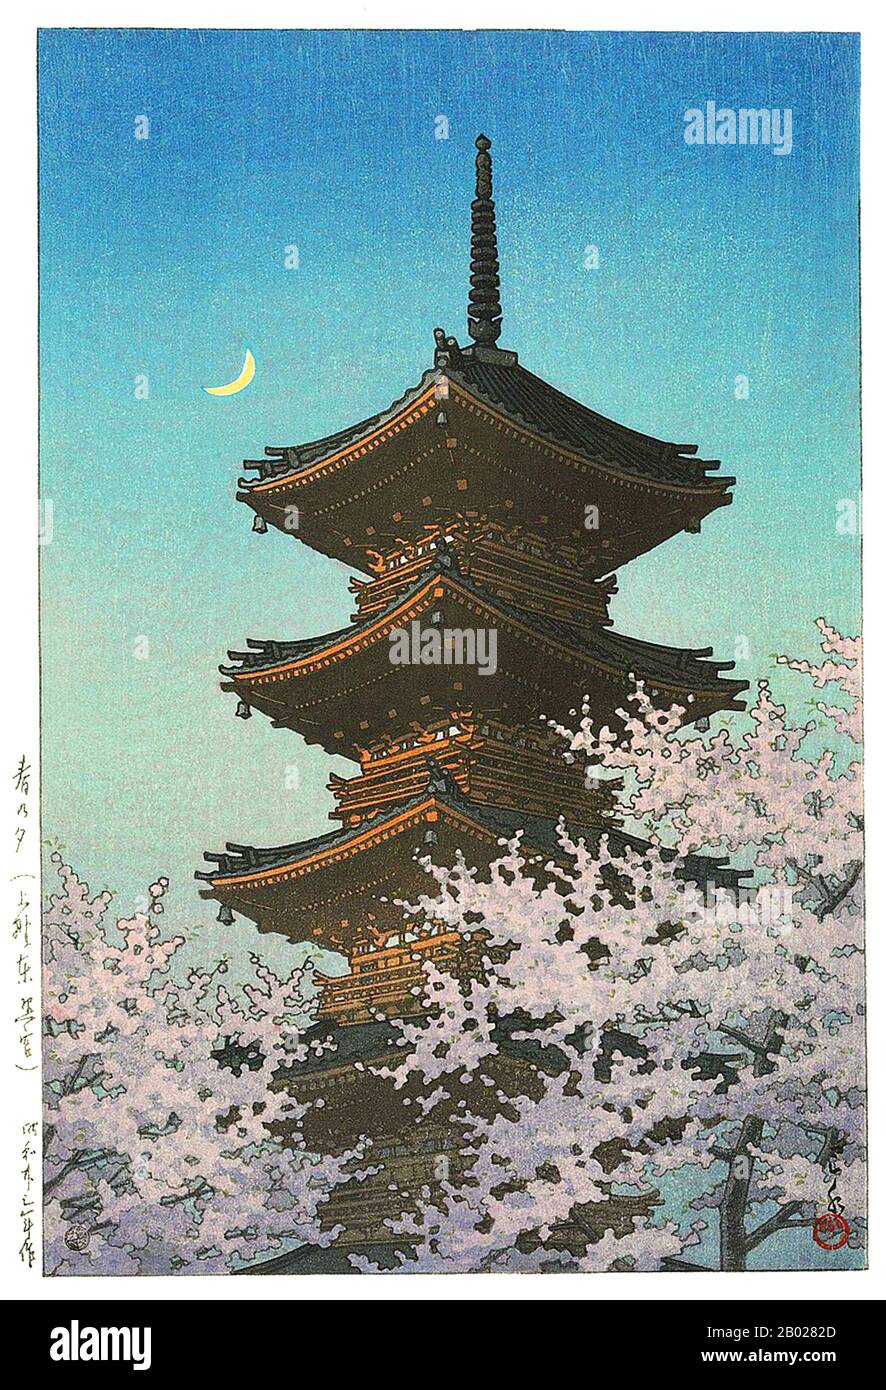 Hasui Kawase (川瀬 巴水 Kawase Hasui, May 18, 1883 – November 7, 1957) was a prominent Japanese painter of the late 19th and early 20th centuries, and one of the chief printmakers in the shin-hanga ('new prints') movement.  Kawase studied ukiyo-e and Japanese style painting at the studio of Kiyokata Kaburagi. He mainly concentrated on making watercolors of actors, everyday life and landscapes, many of them published as illustrations in books and magazines in the last few years of the Meiji period and early Taishō period. Stock Photo